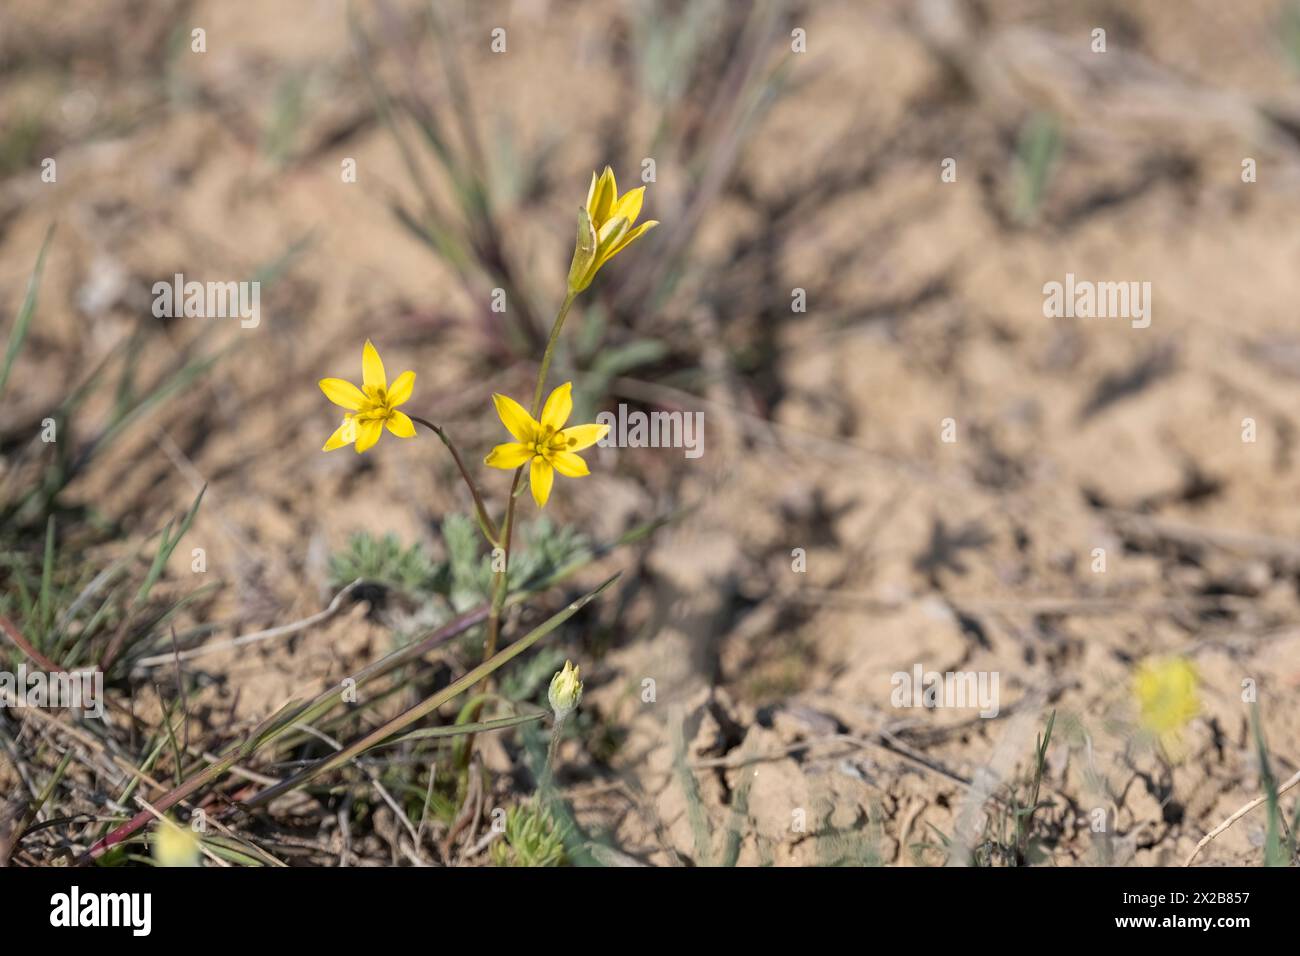 Goose onion, or Goosebow, or Gooseweed, or Geidzhia, or Bird's onion, Gagea In the desert soil of the earth, two small yellow spring flowers bloom, Stock Photo